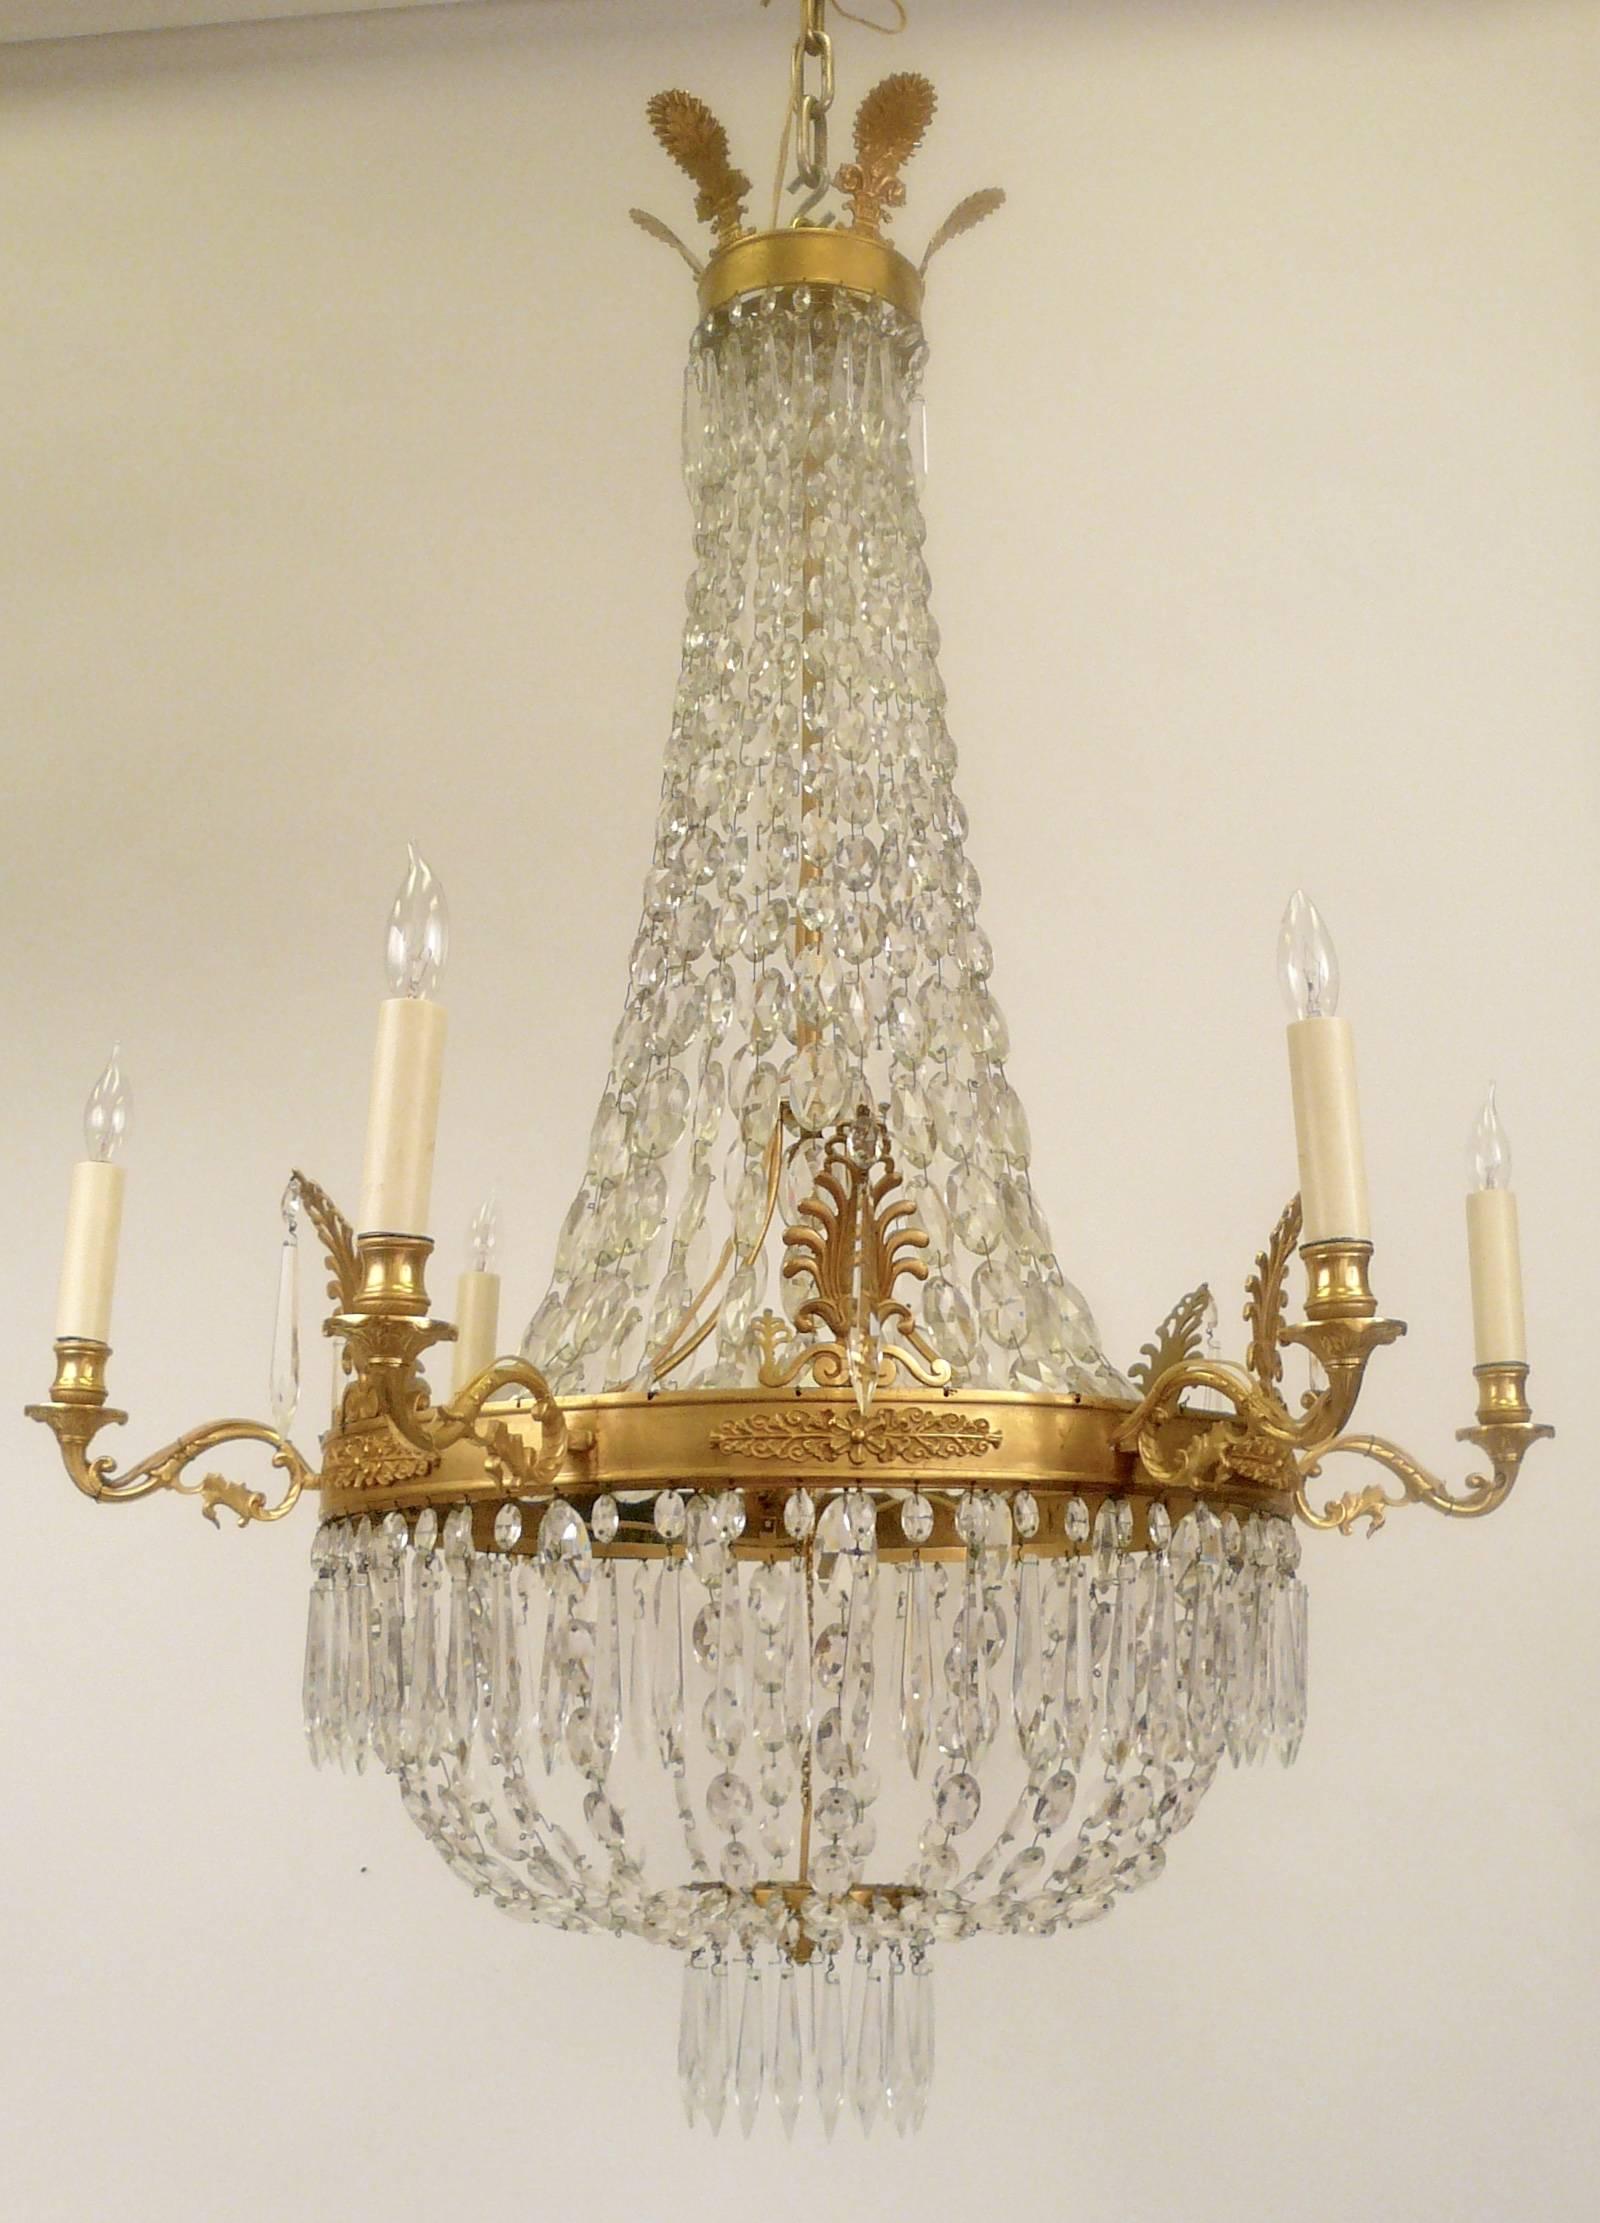 This bronze and crystal six-light chandelier is of fine proportion and has a beautiful gilt finish.